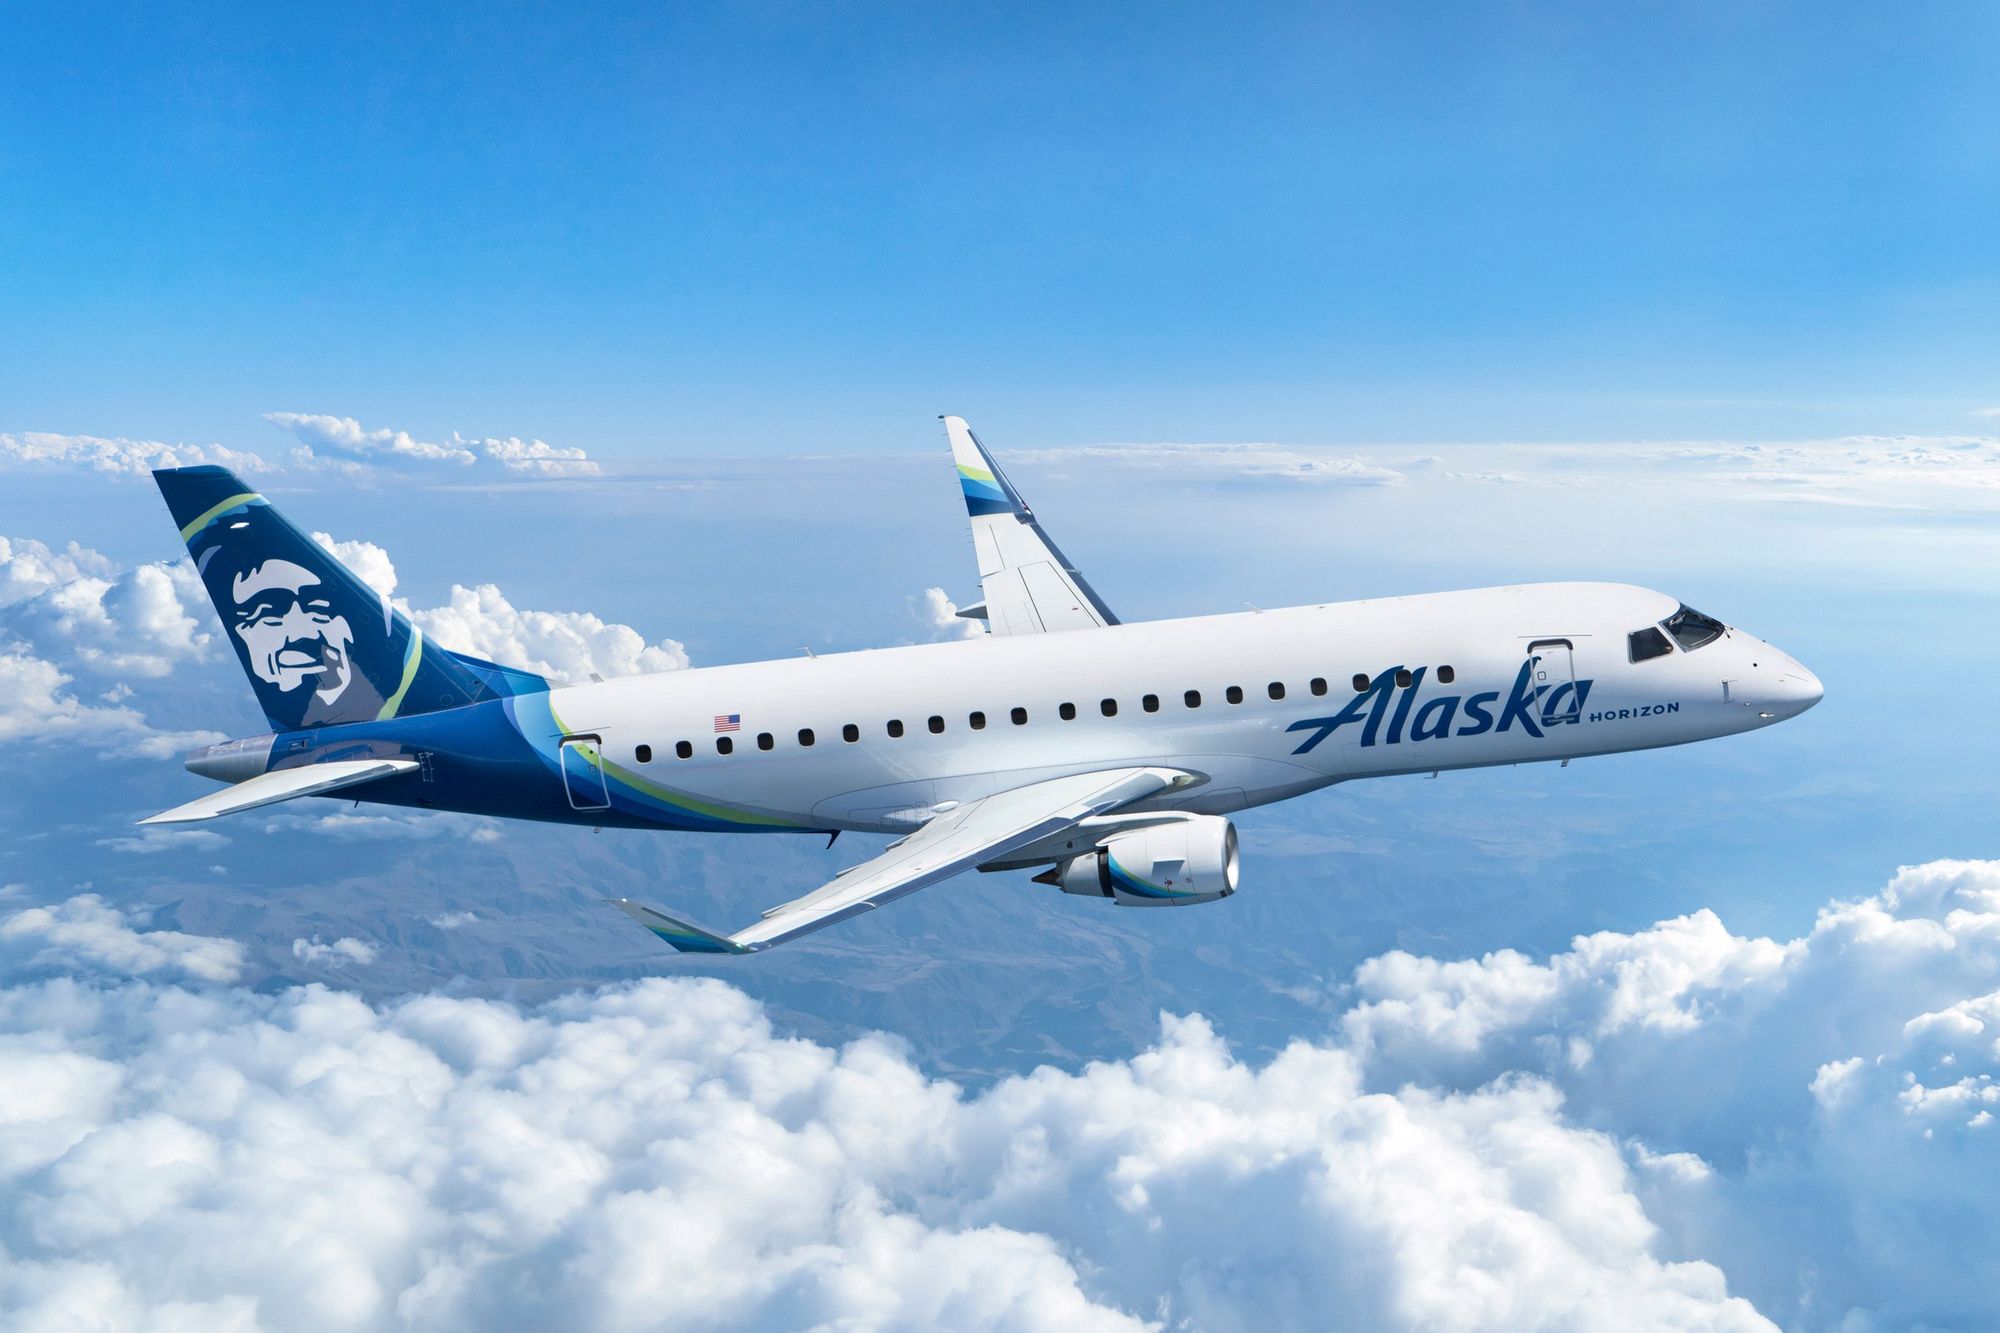 Alaska Airlines announces plans for fleet growth and route expansion